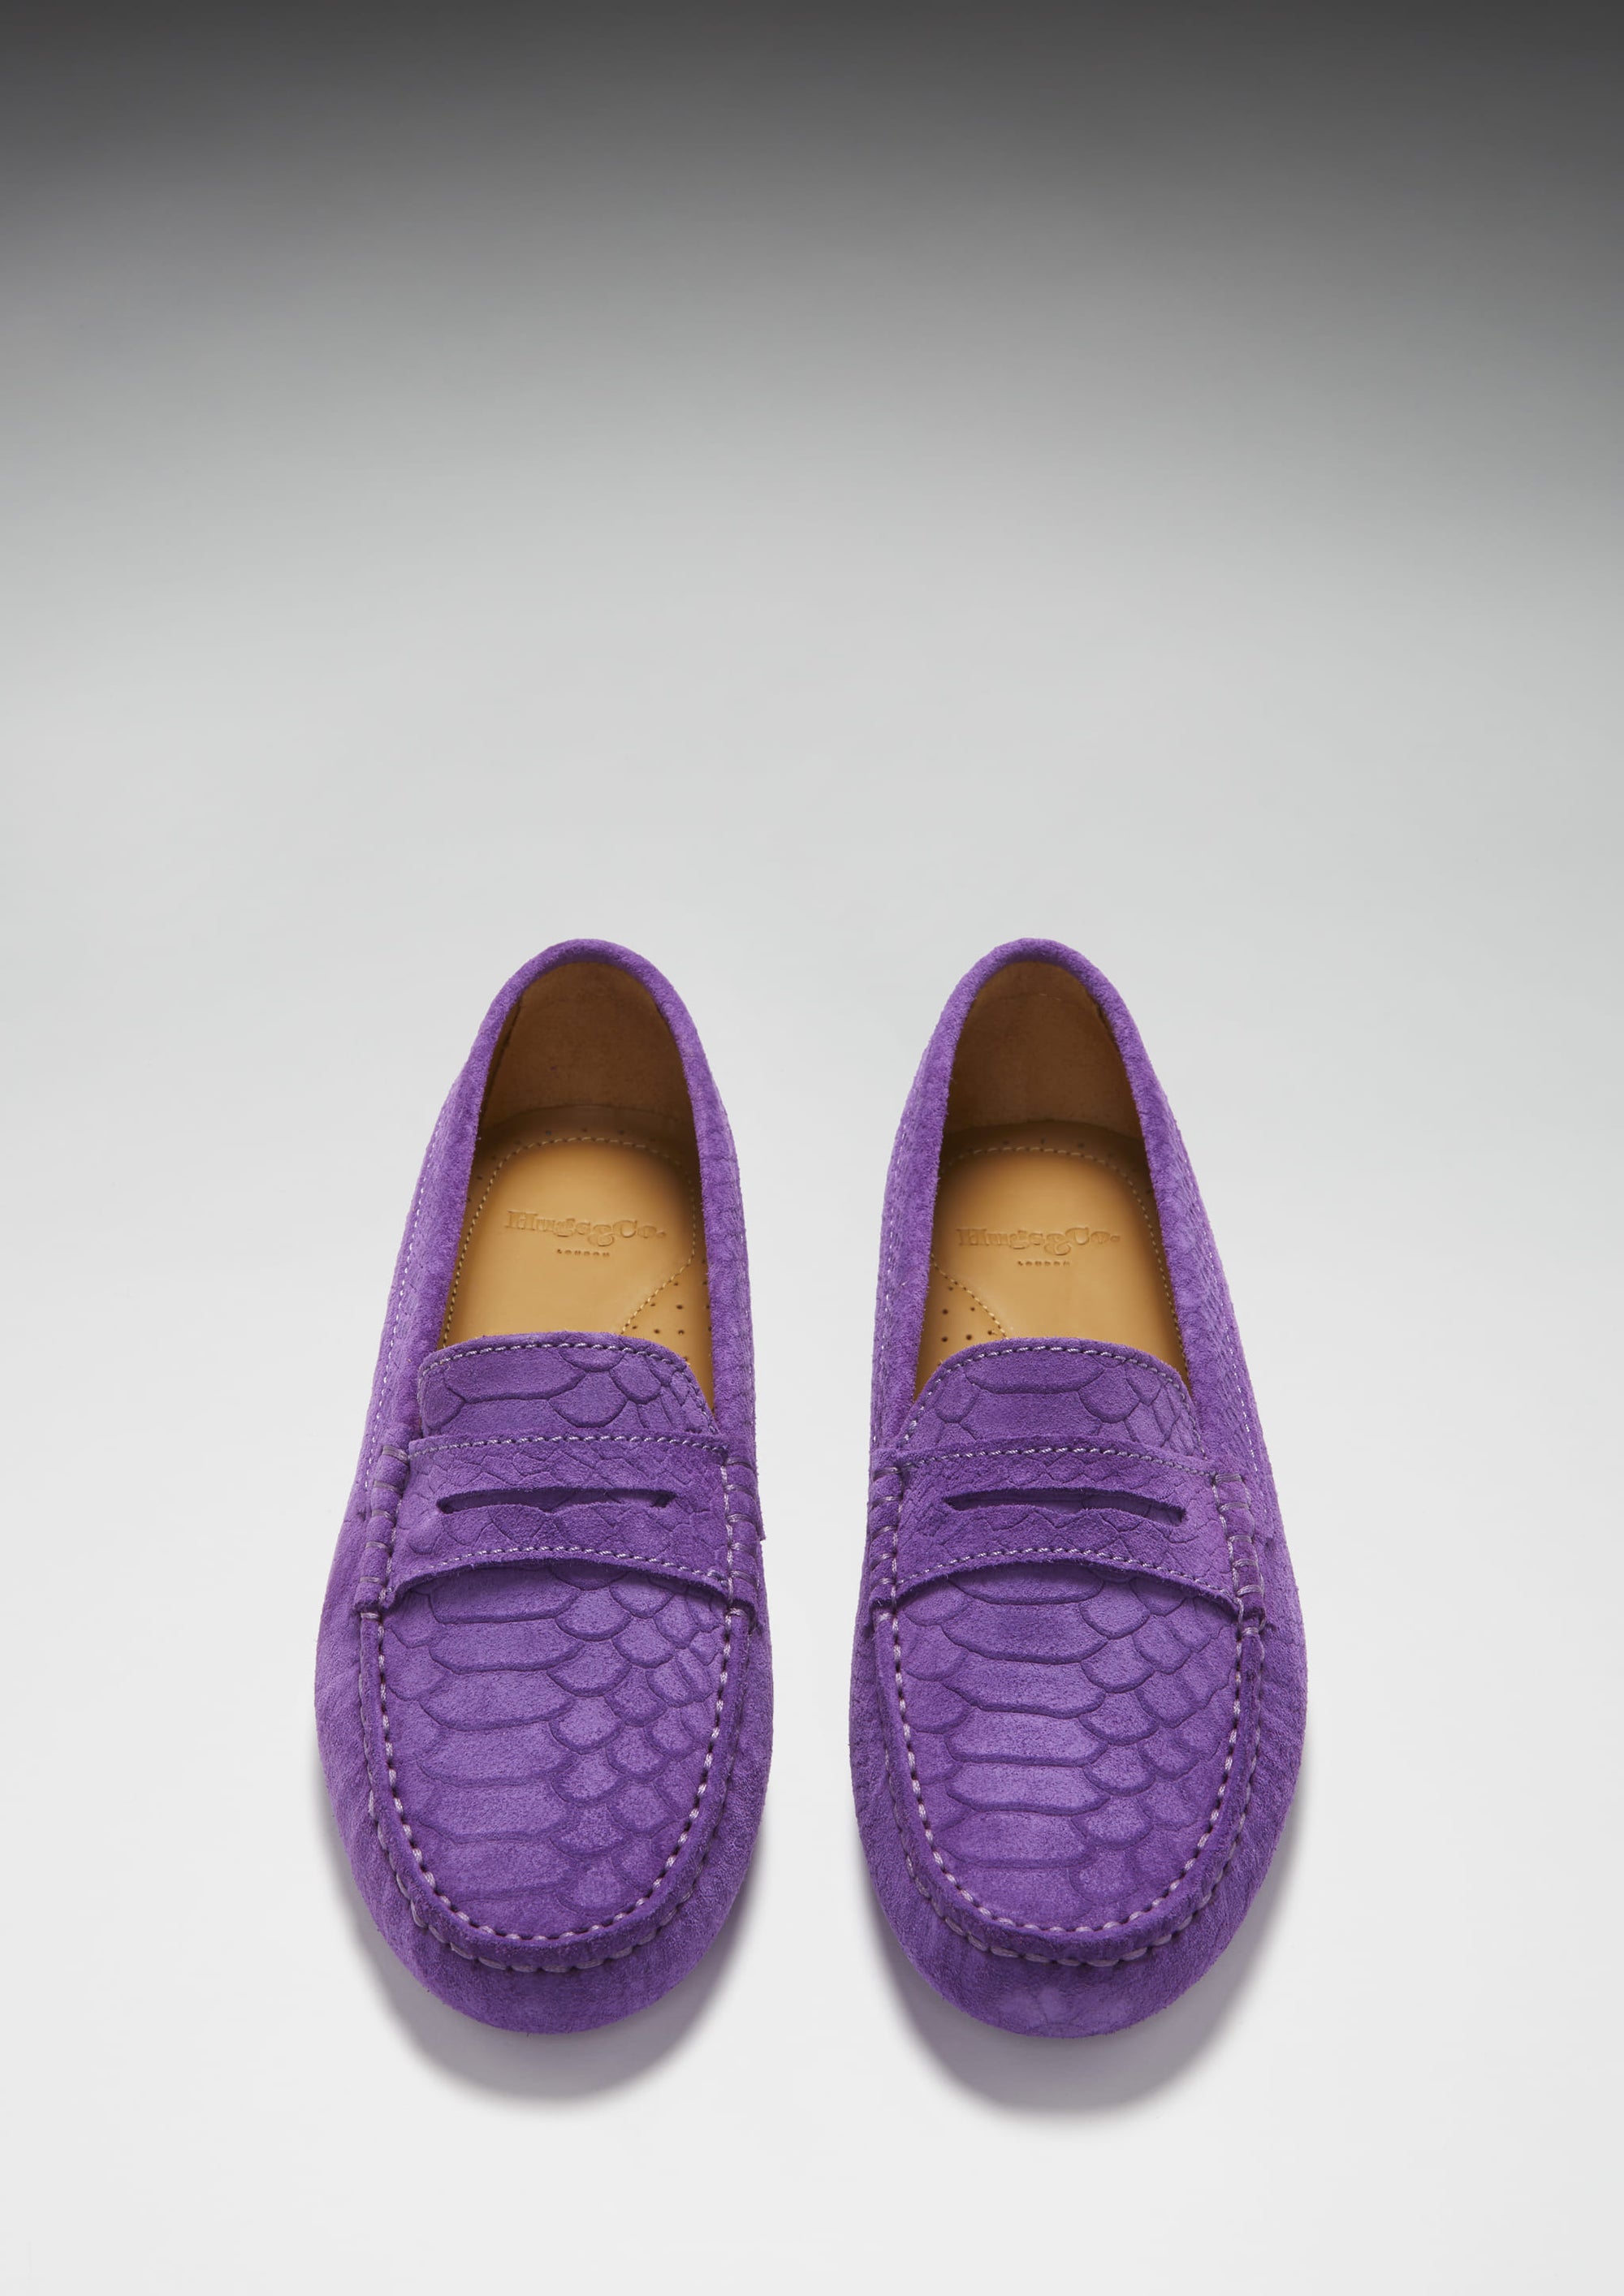 Women's Penny Driving Loafers, purple embossed suede